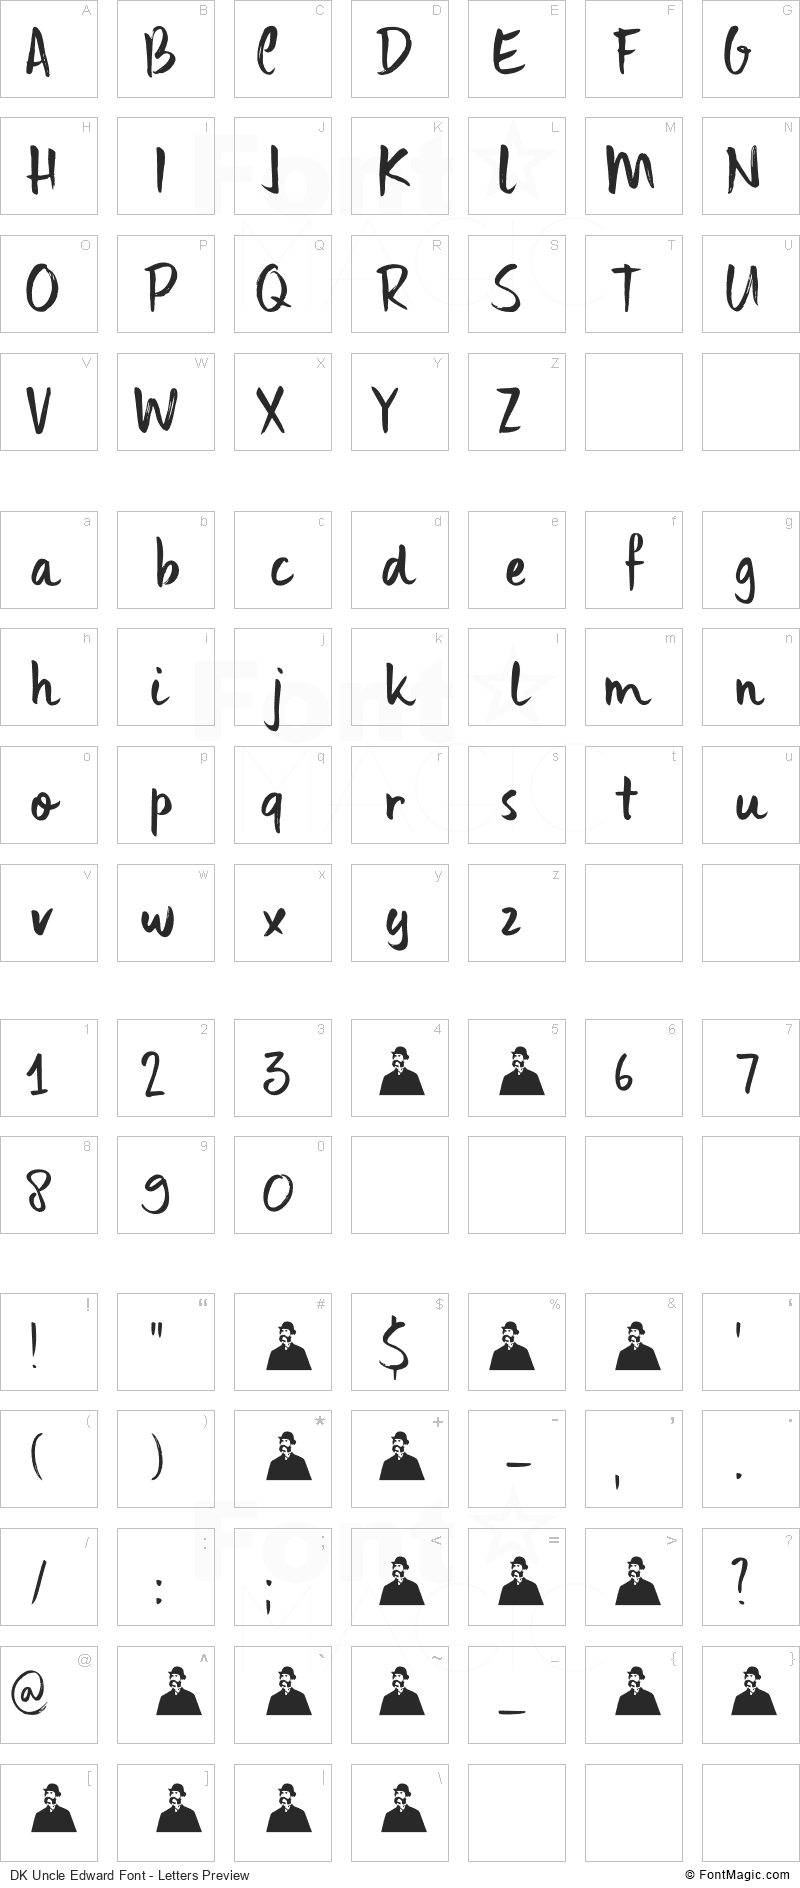 DK Uncle Edward Font - All Latters Preview Chart